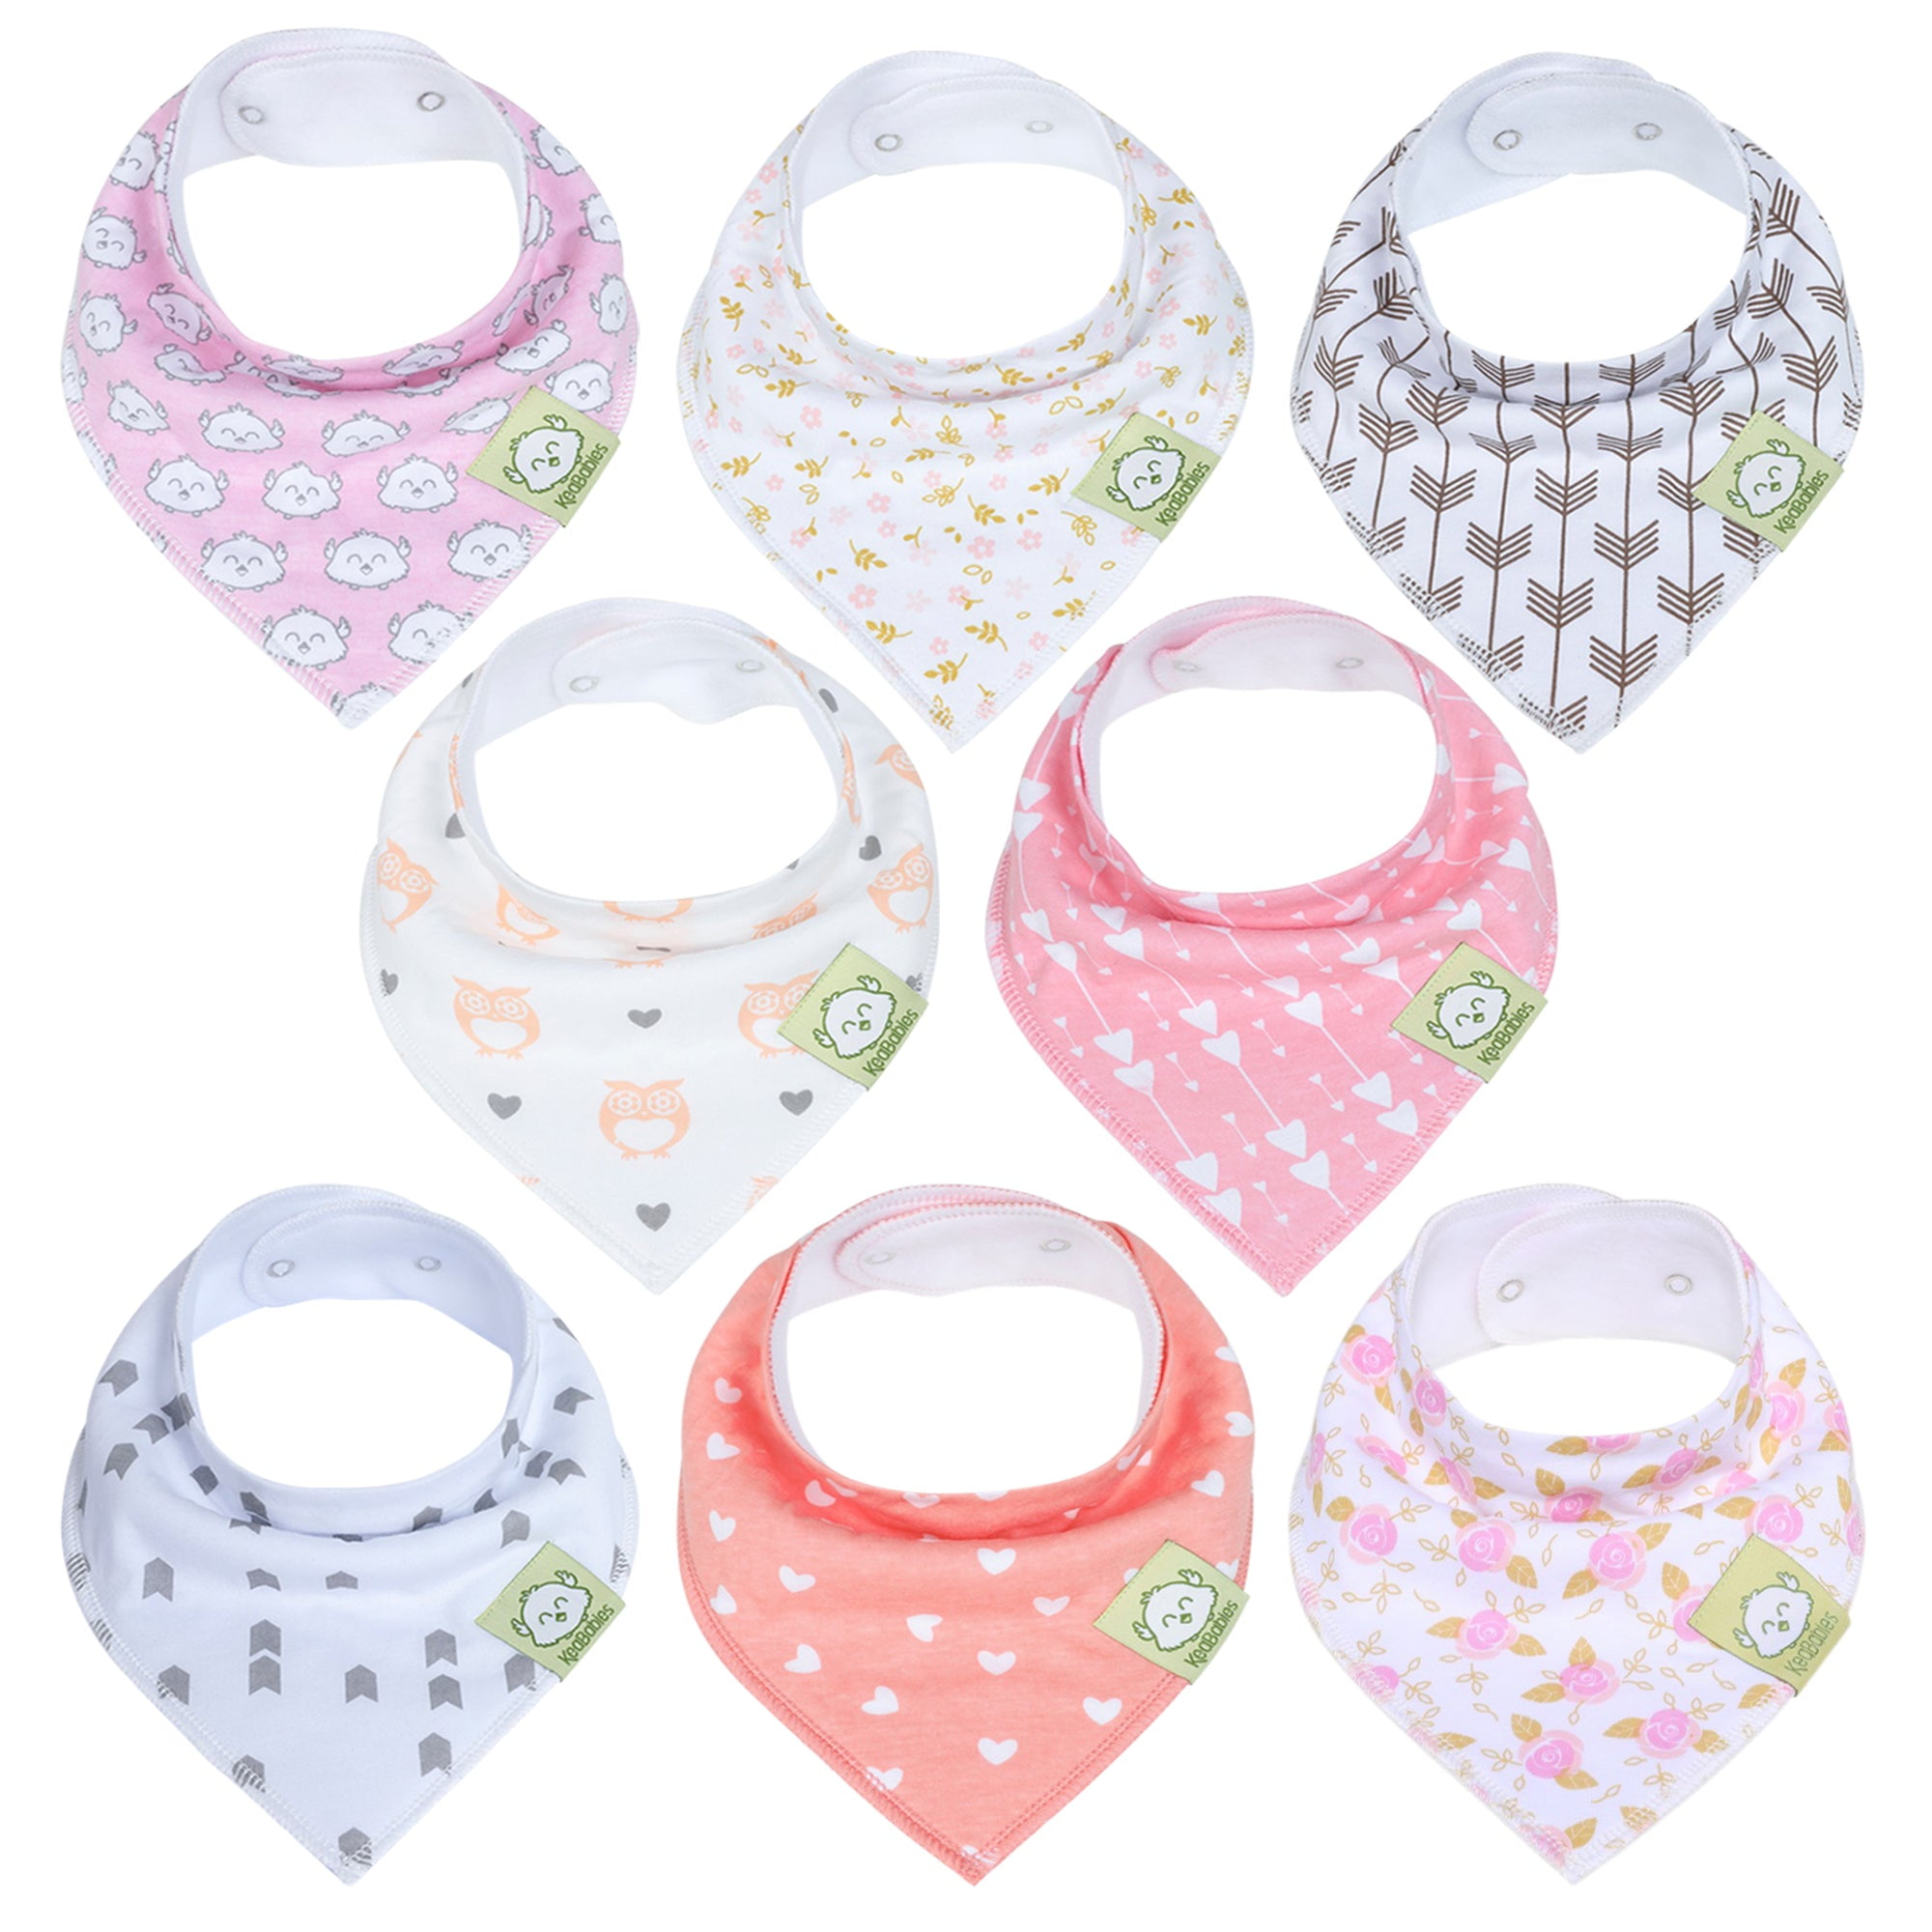 Bestbaby Baby Bandana Dribble Bibs with Snaps 6 Packs Super Absorbent Cotton Feeding Bibs Cute Baby Gift Set for Newborns Girls Infants Toddlers 